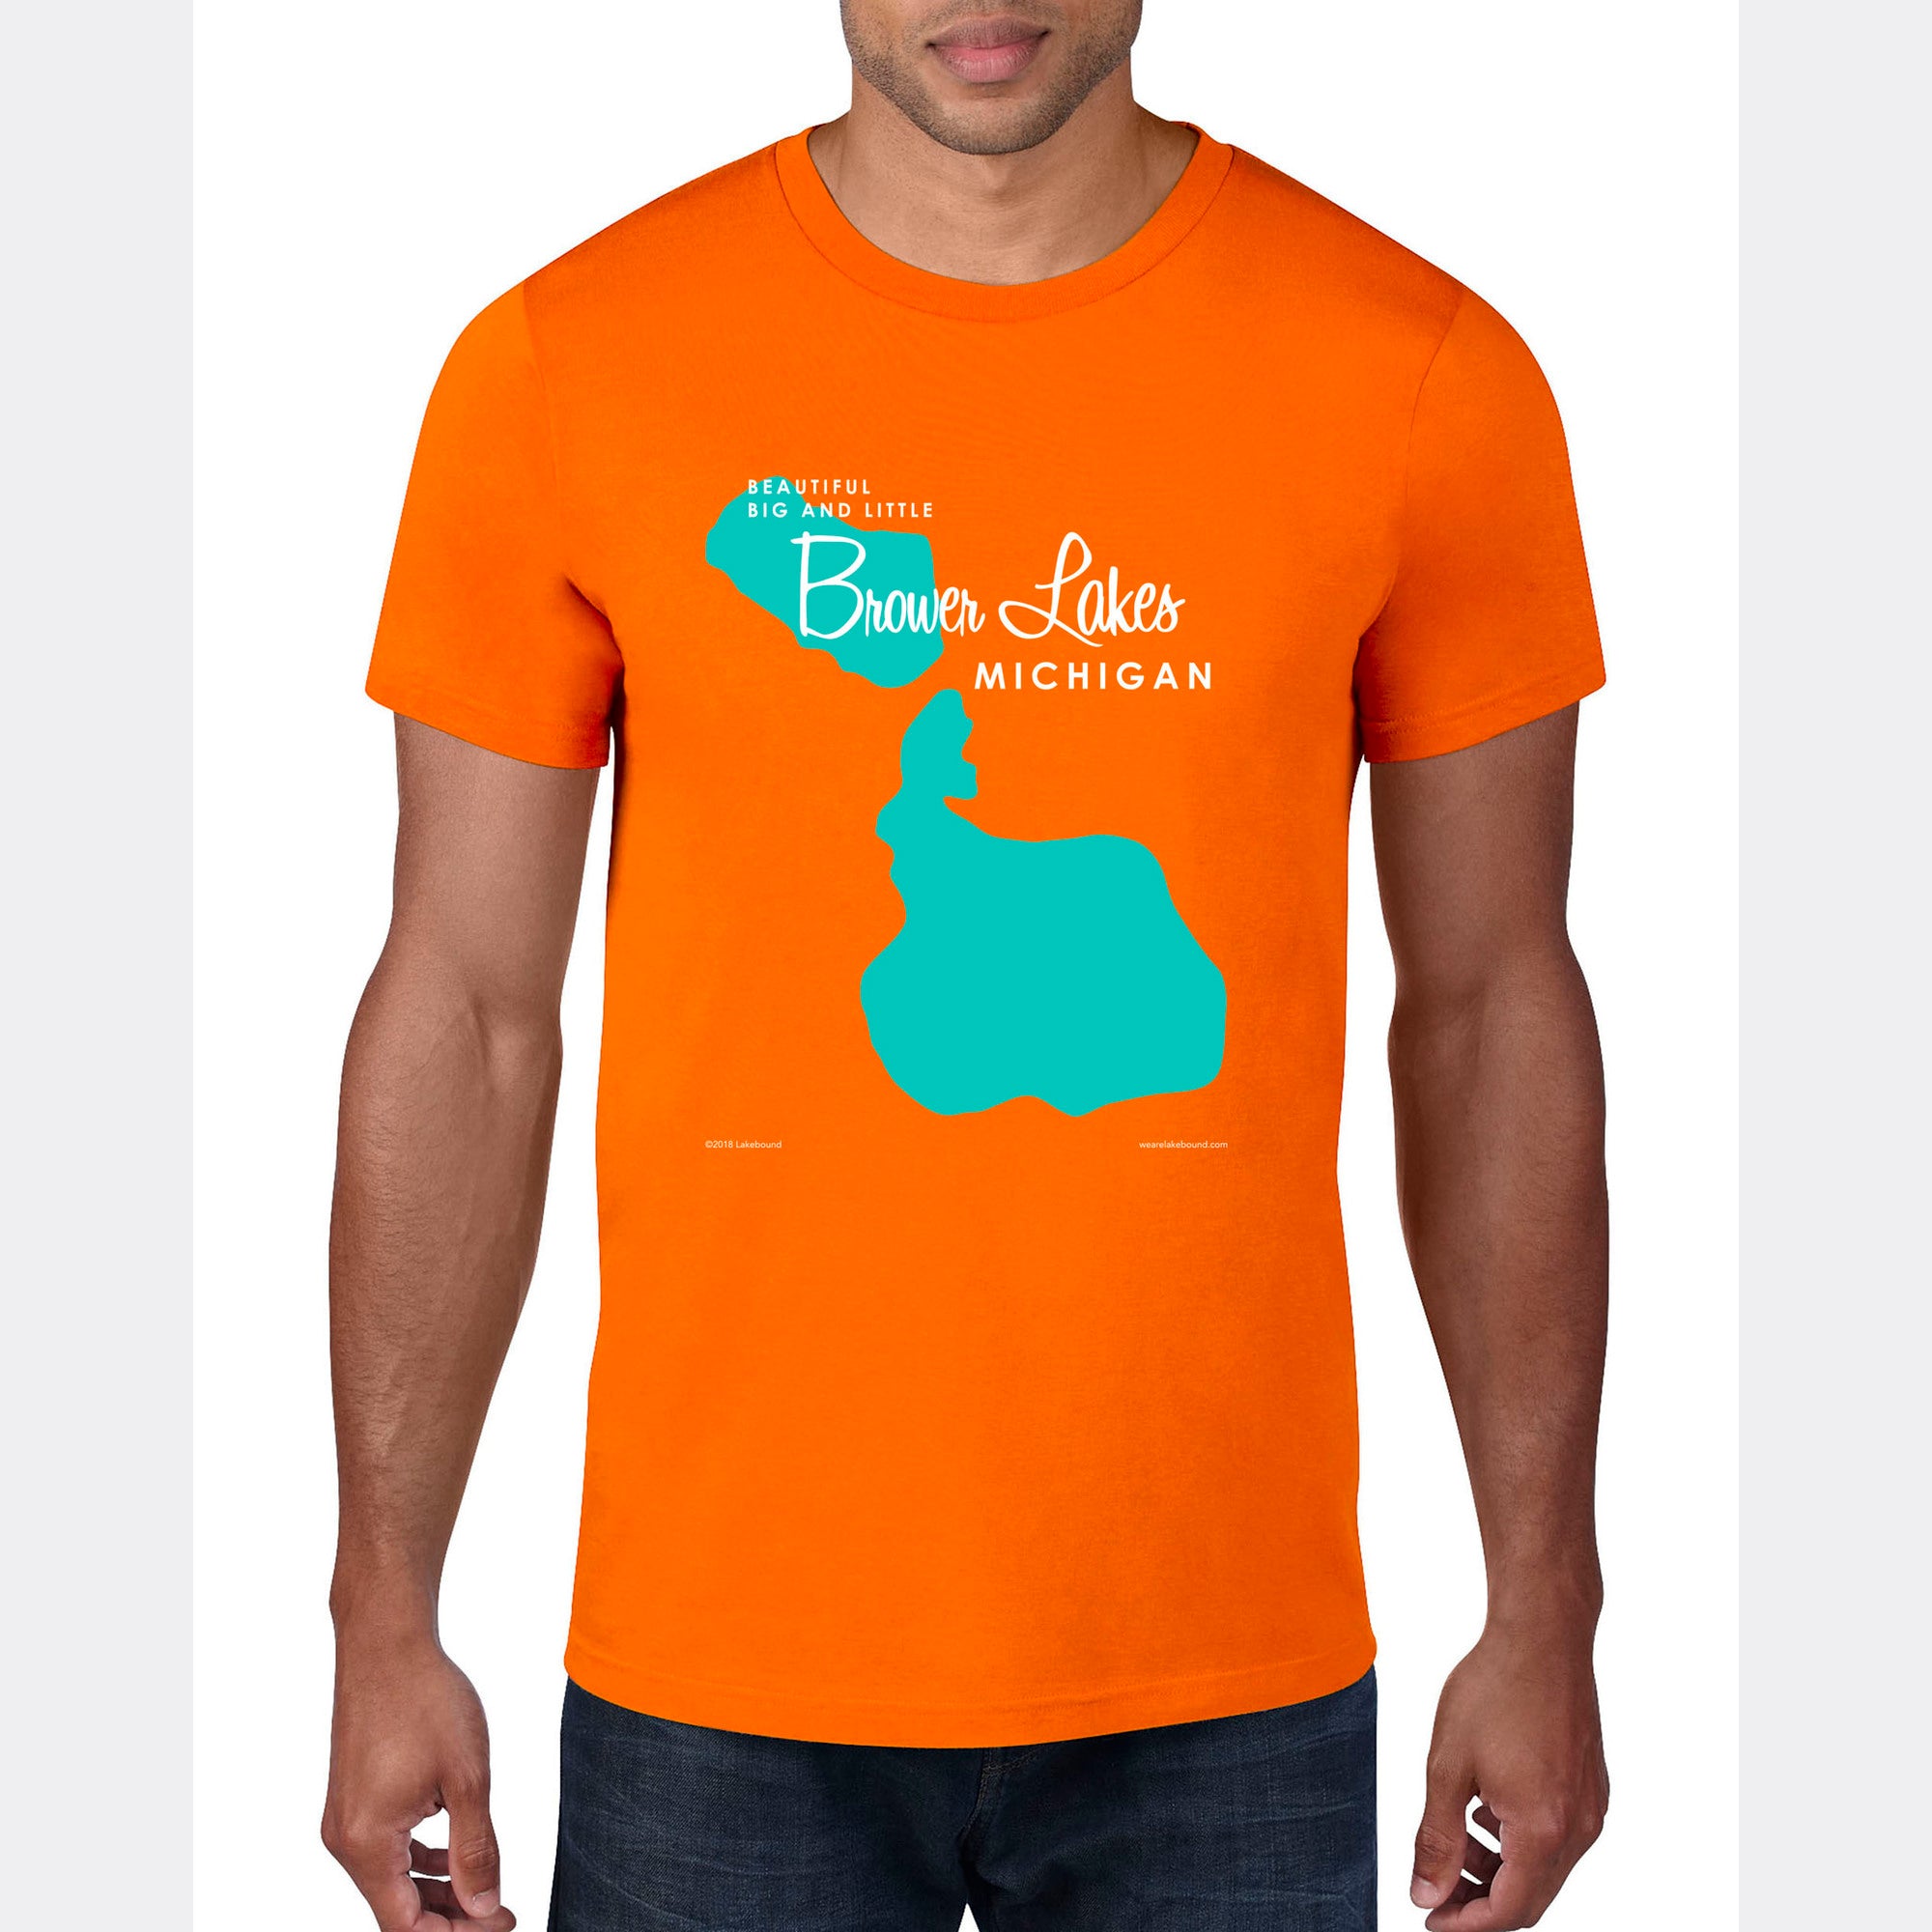 Big and Little Brower Lakes Michigan, T-Shirt